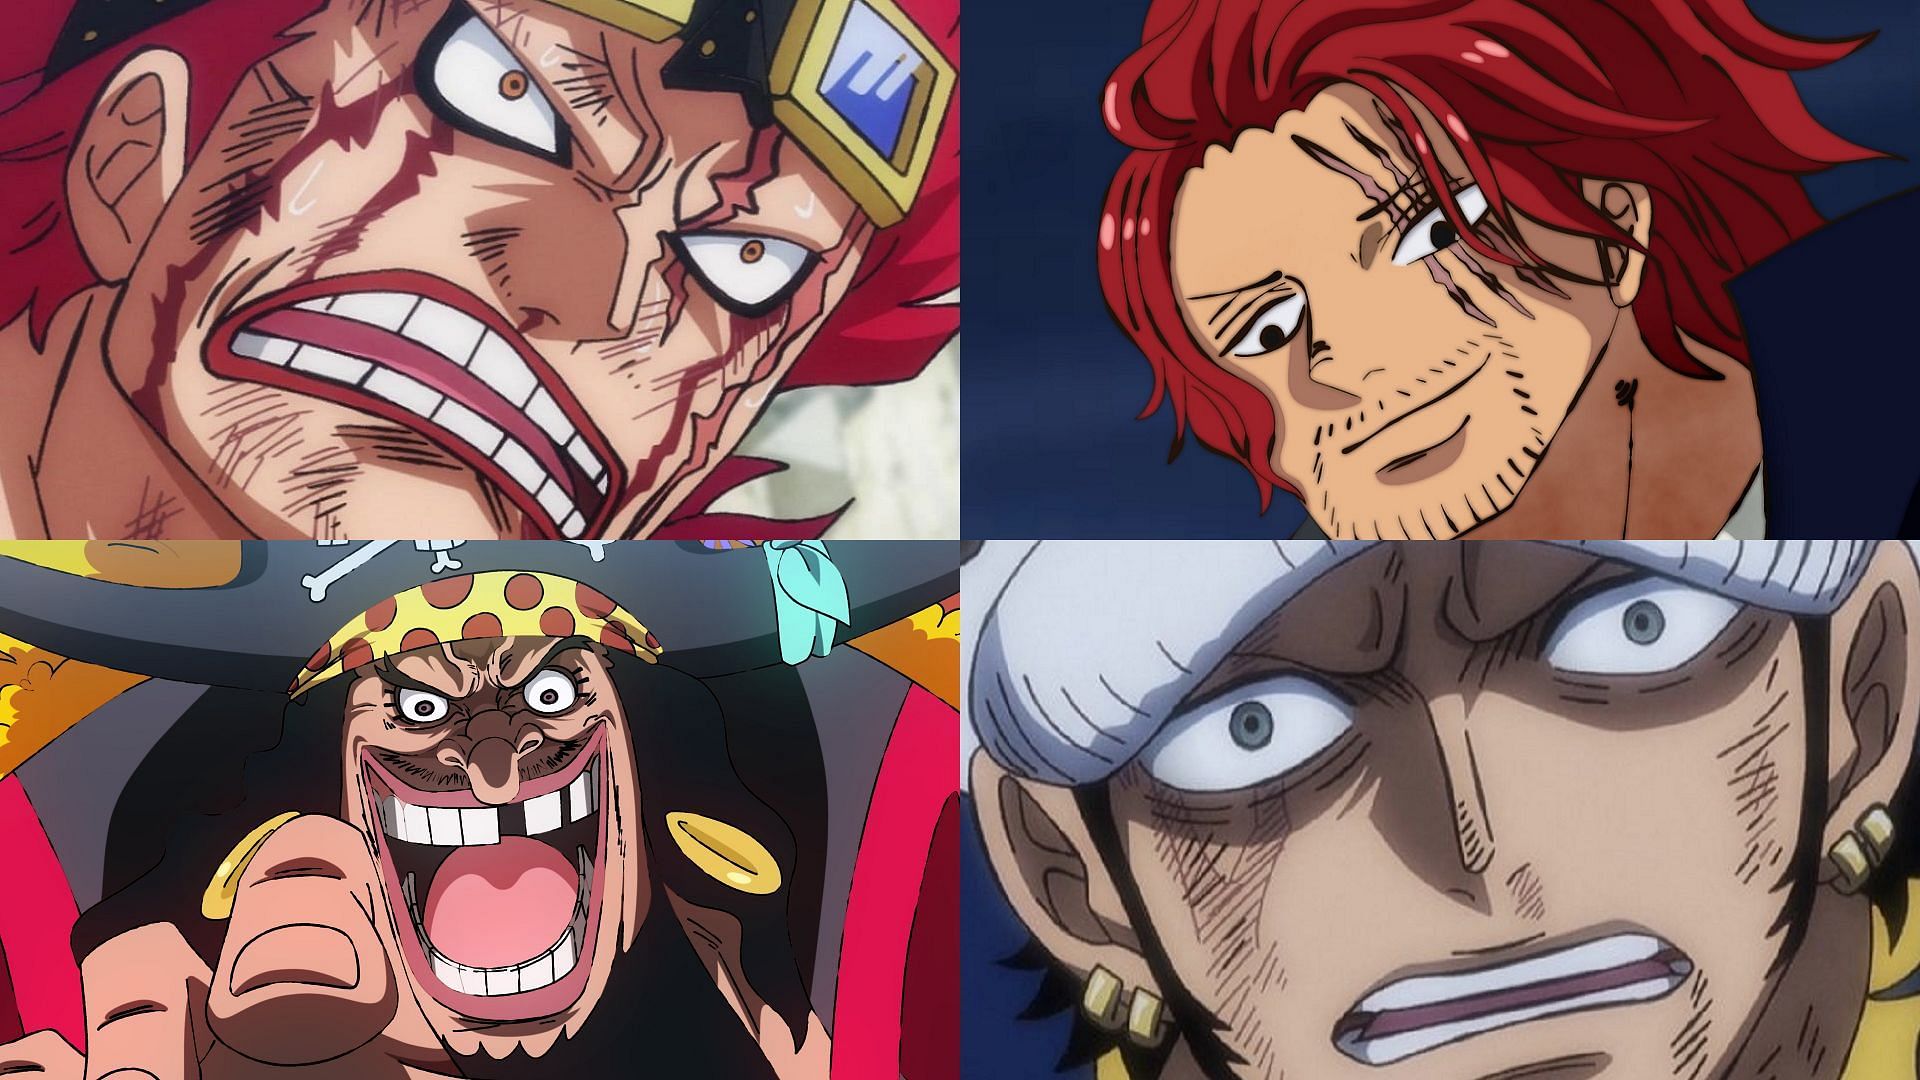 Law and Kid just stood no chance (Image via Toei Animation, One Piece)